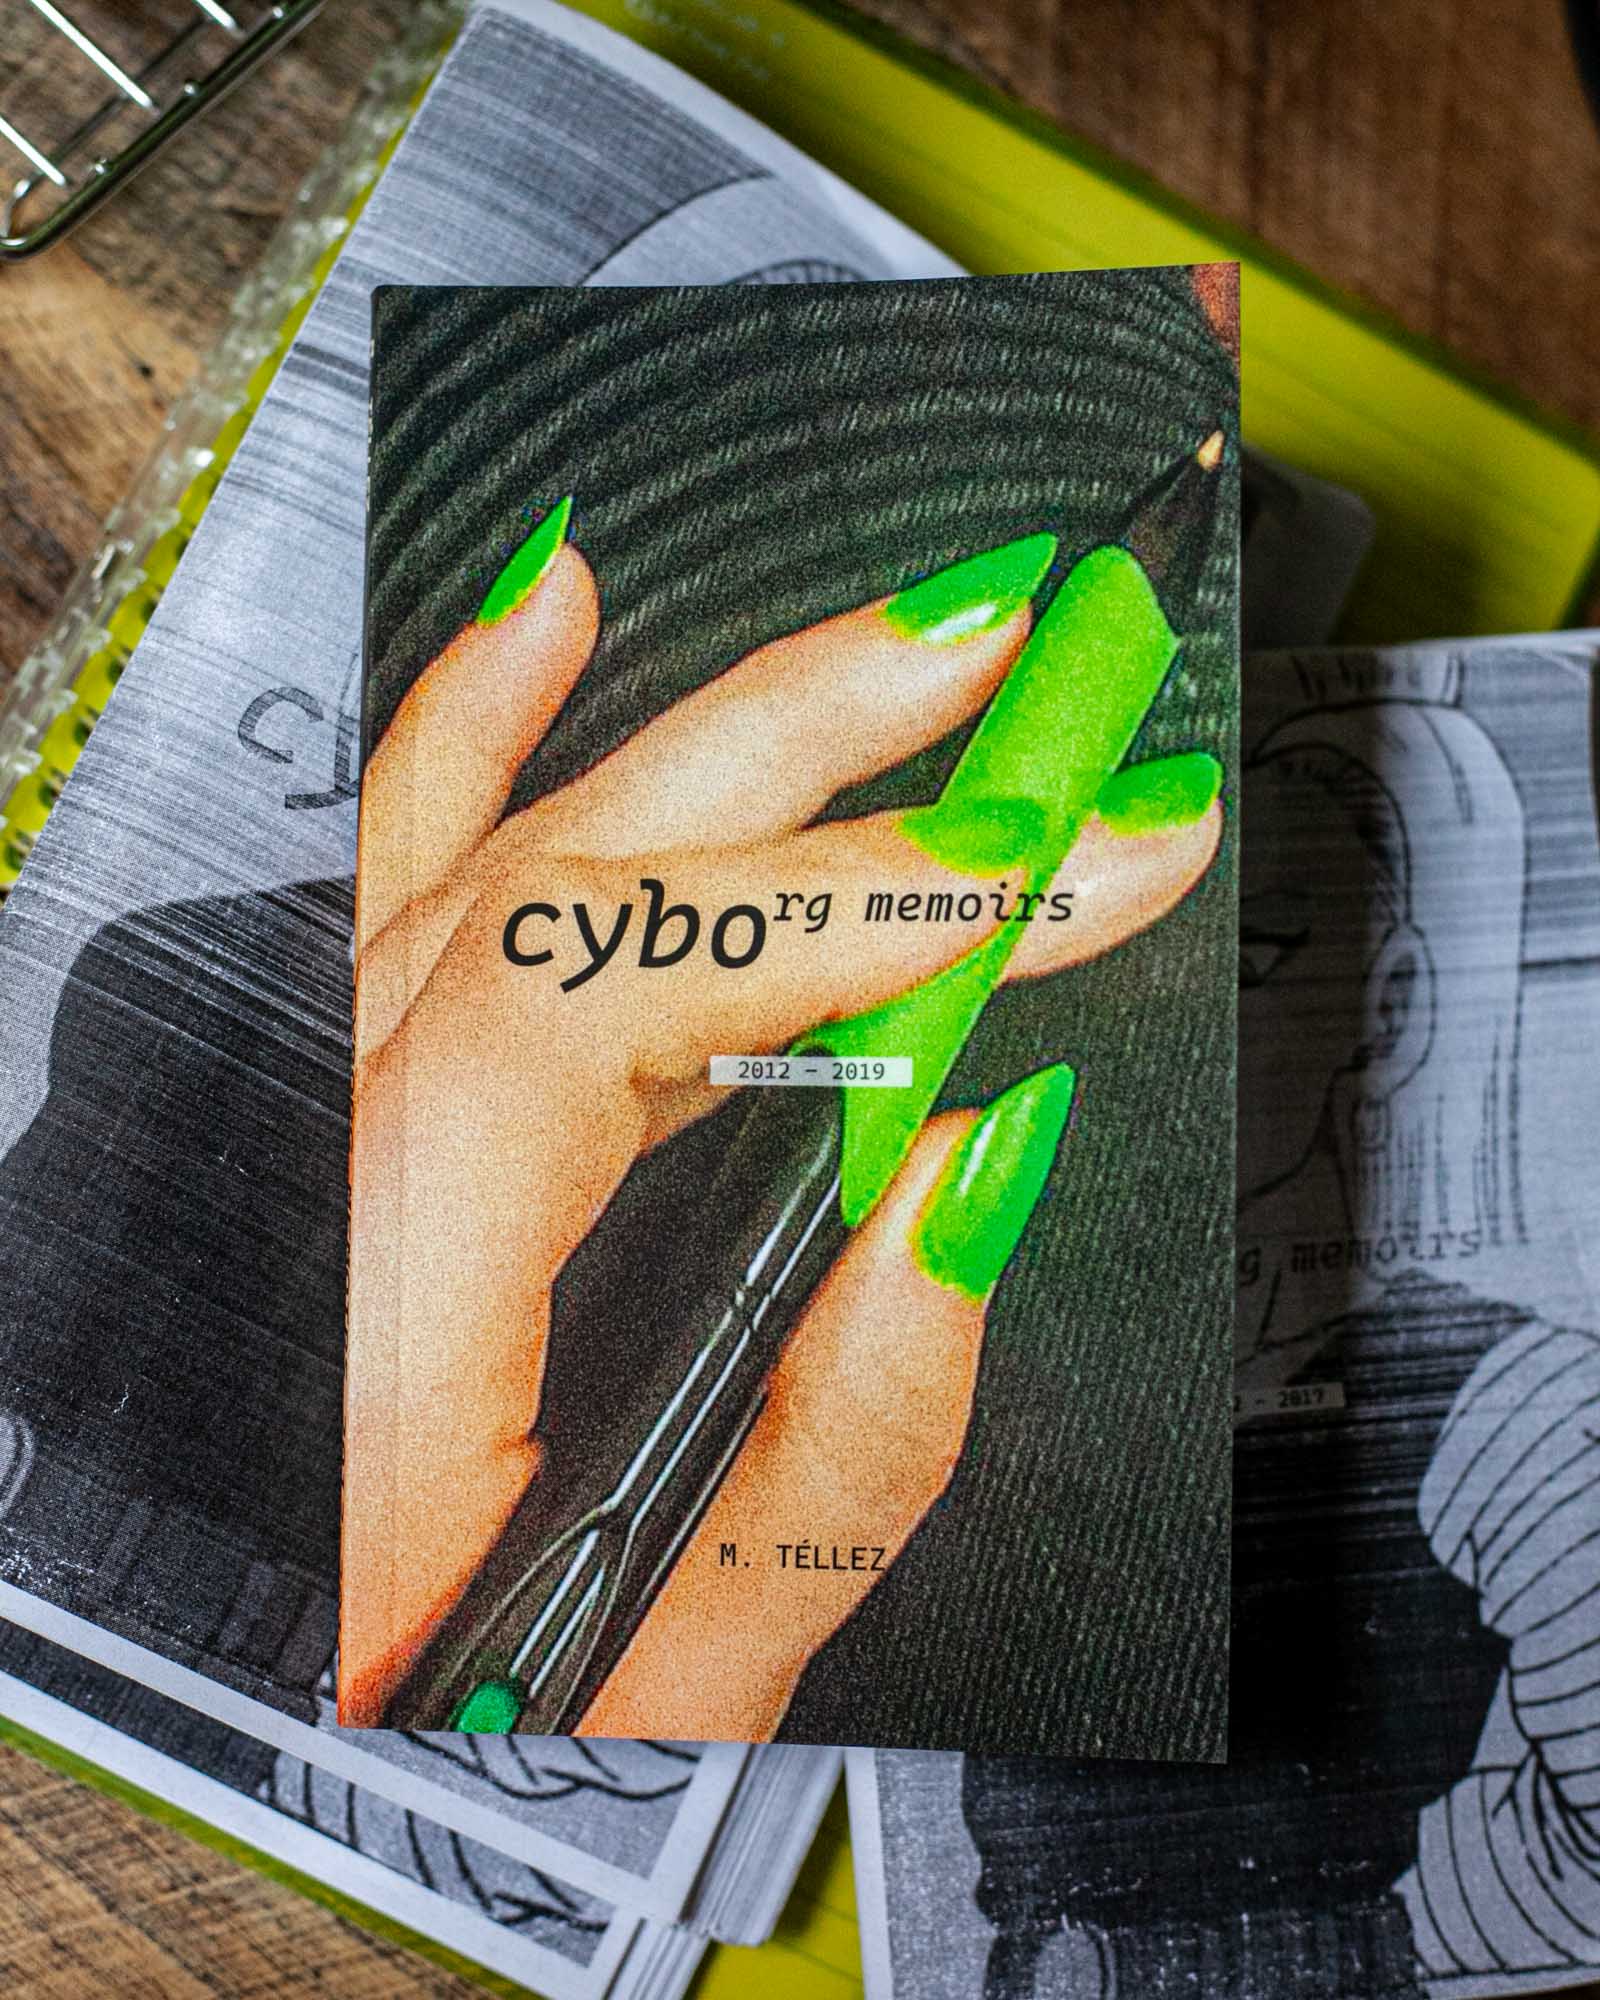 Cyborg Memoirs 2012~2019: An exercise in printing cyberspace